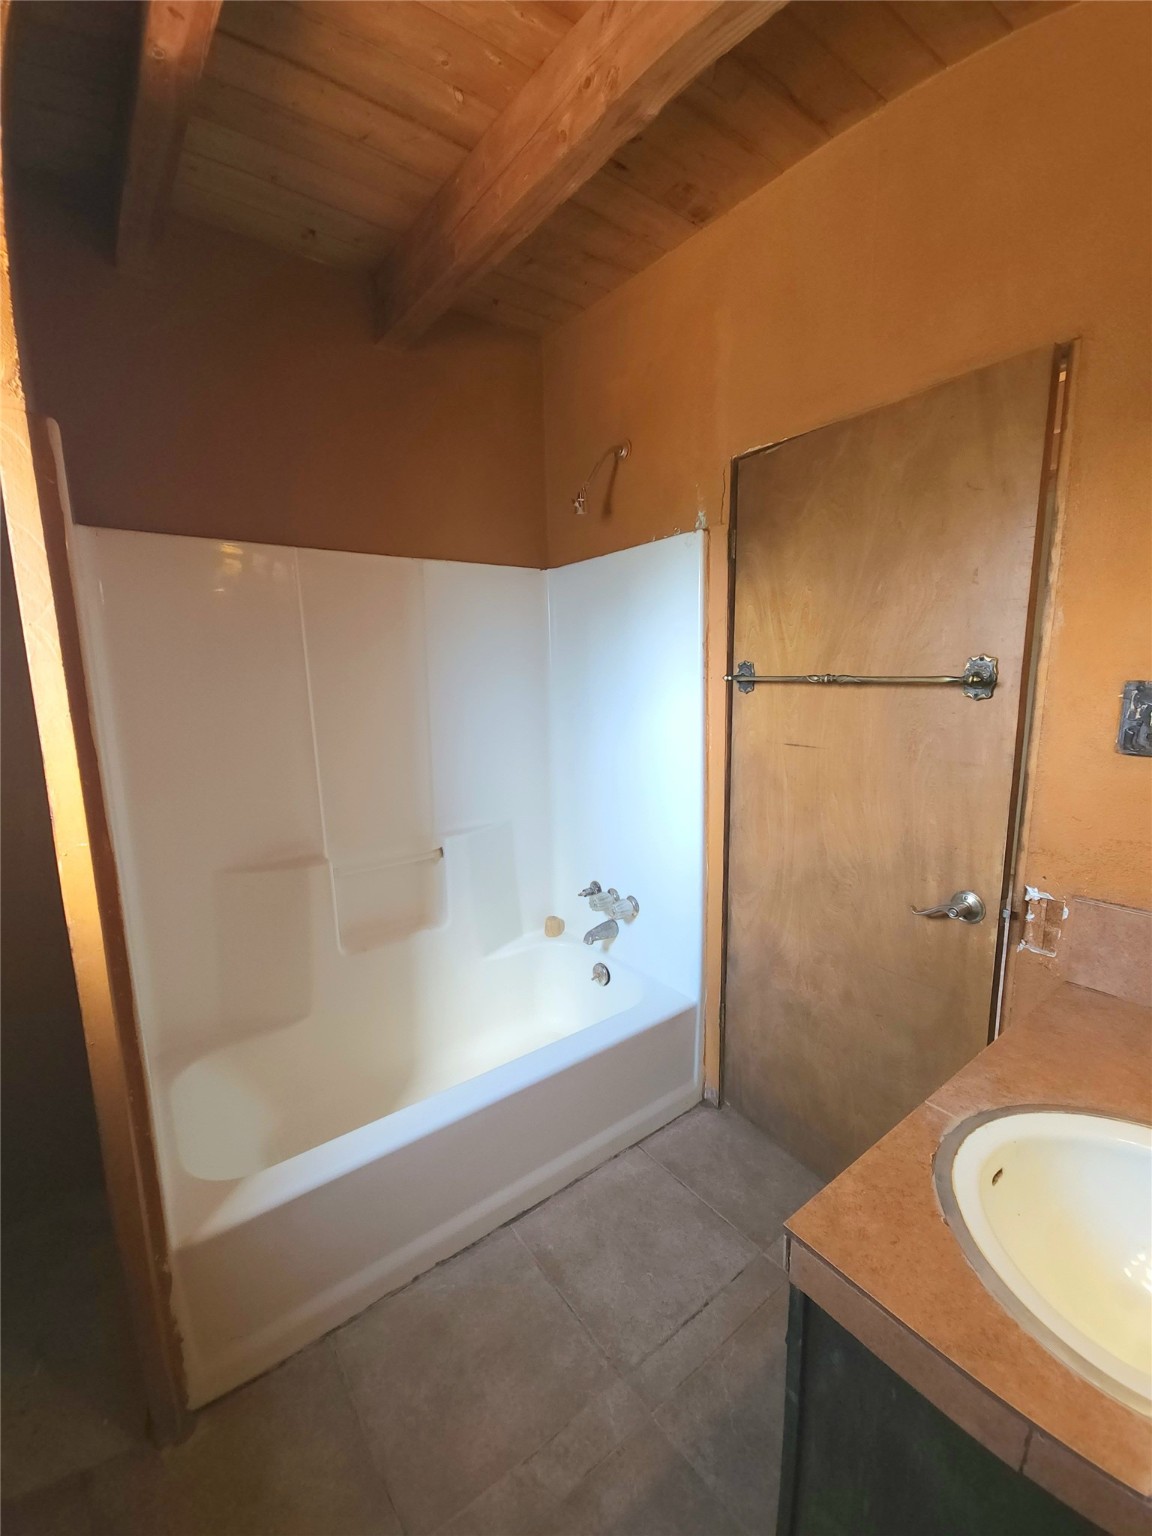 121 County Road 211, Youngsville, New Mexico 87064, 2 Bedrooms Bedrooms, ,1 BathroomBathrooms,Residential,For Sale,121 County Road 211,202233044